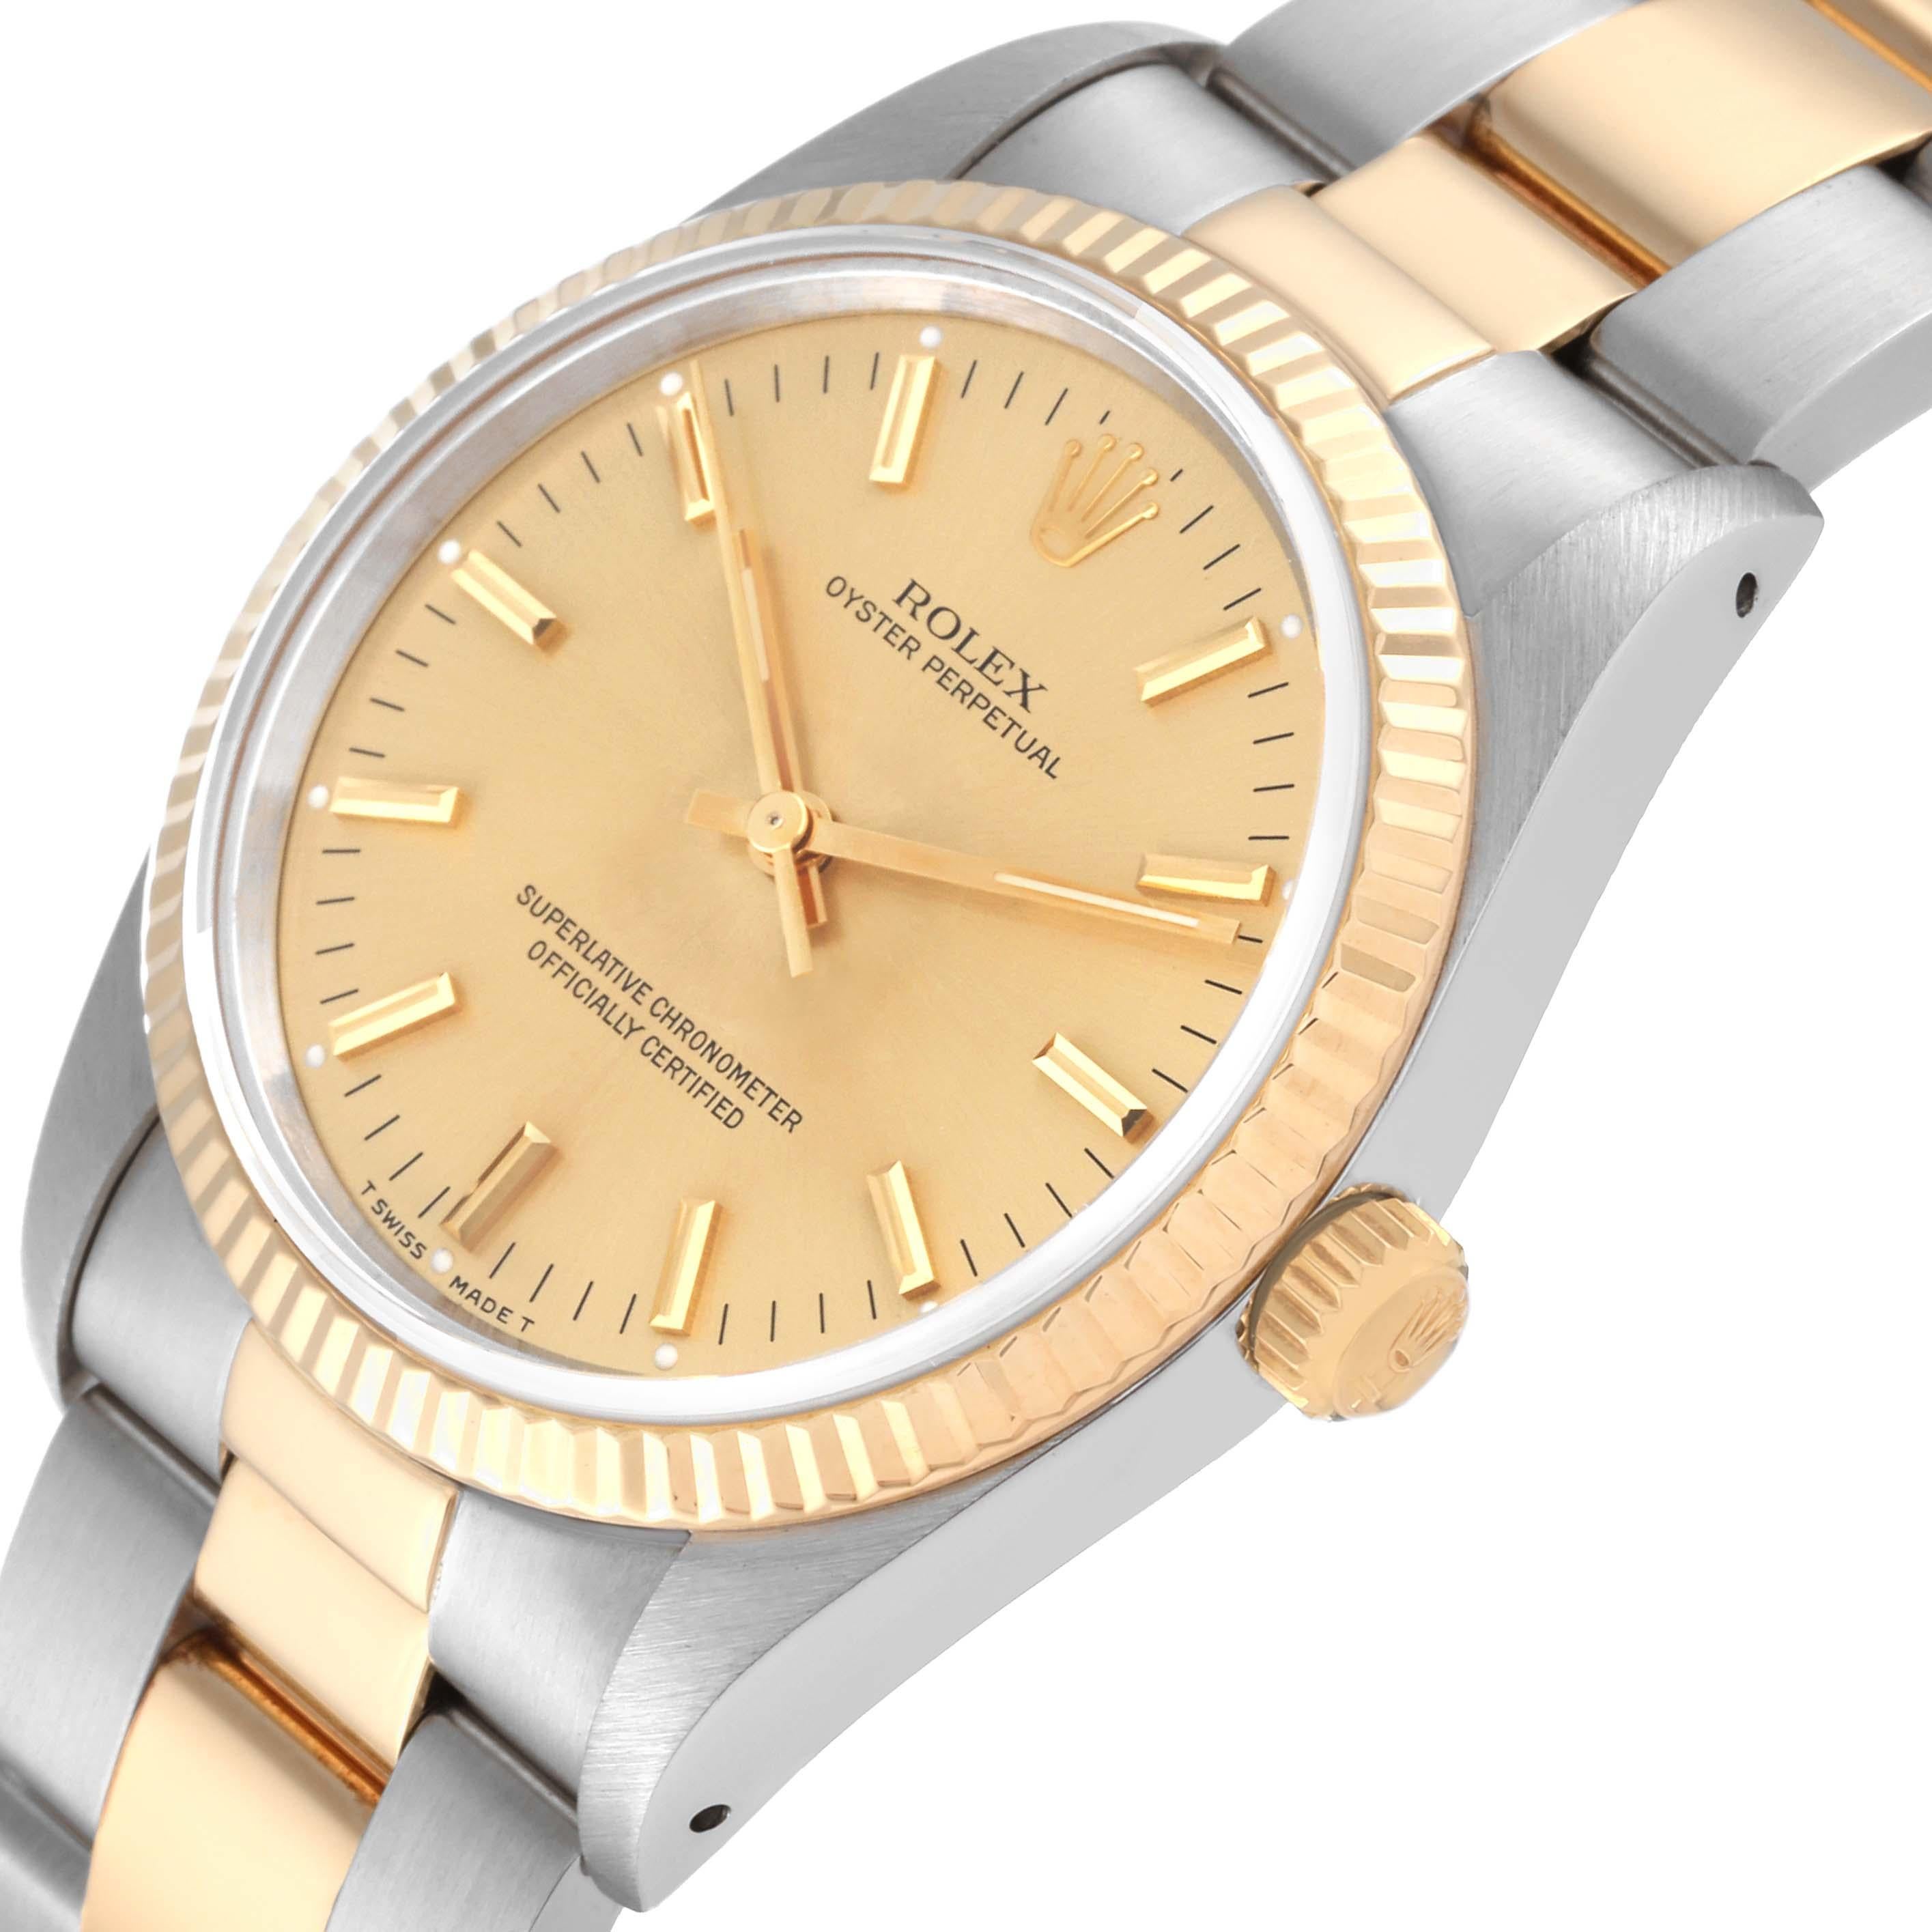 Rolex Oyster Perpetual Fluted Bezel Steel Yellow Gold Mens Watch 14233 1